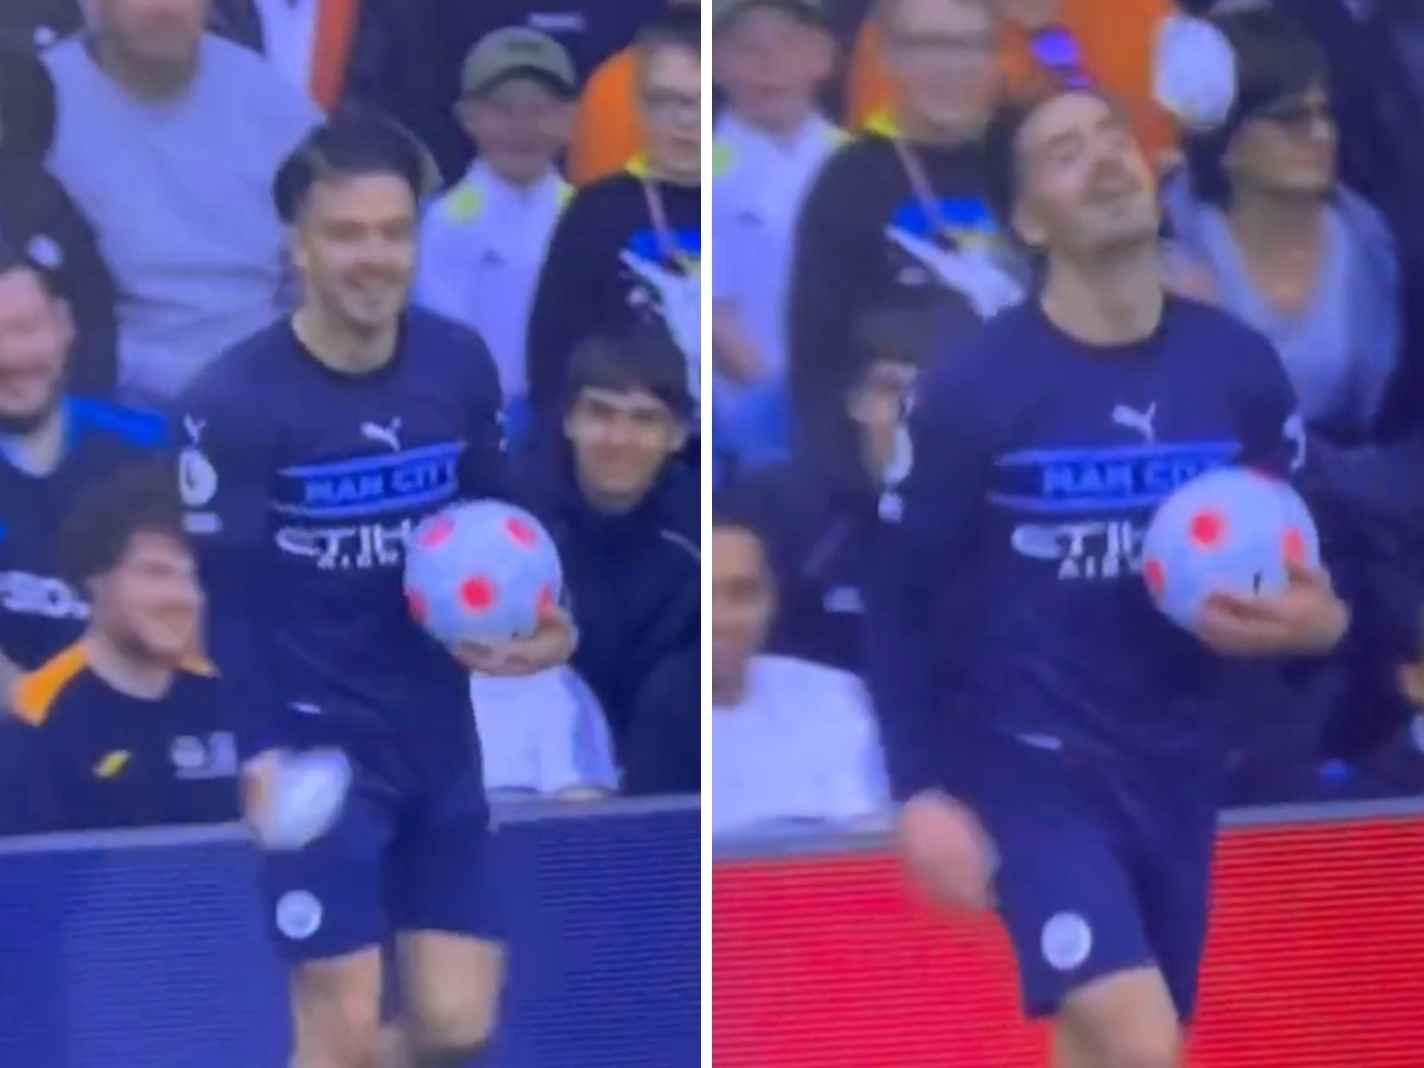 Jack Grealish appeared to love getting hit by paper balls by Leeds United fans at Elland Road